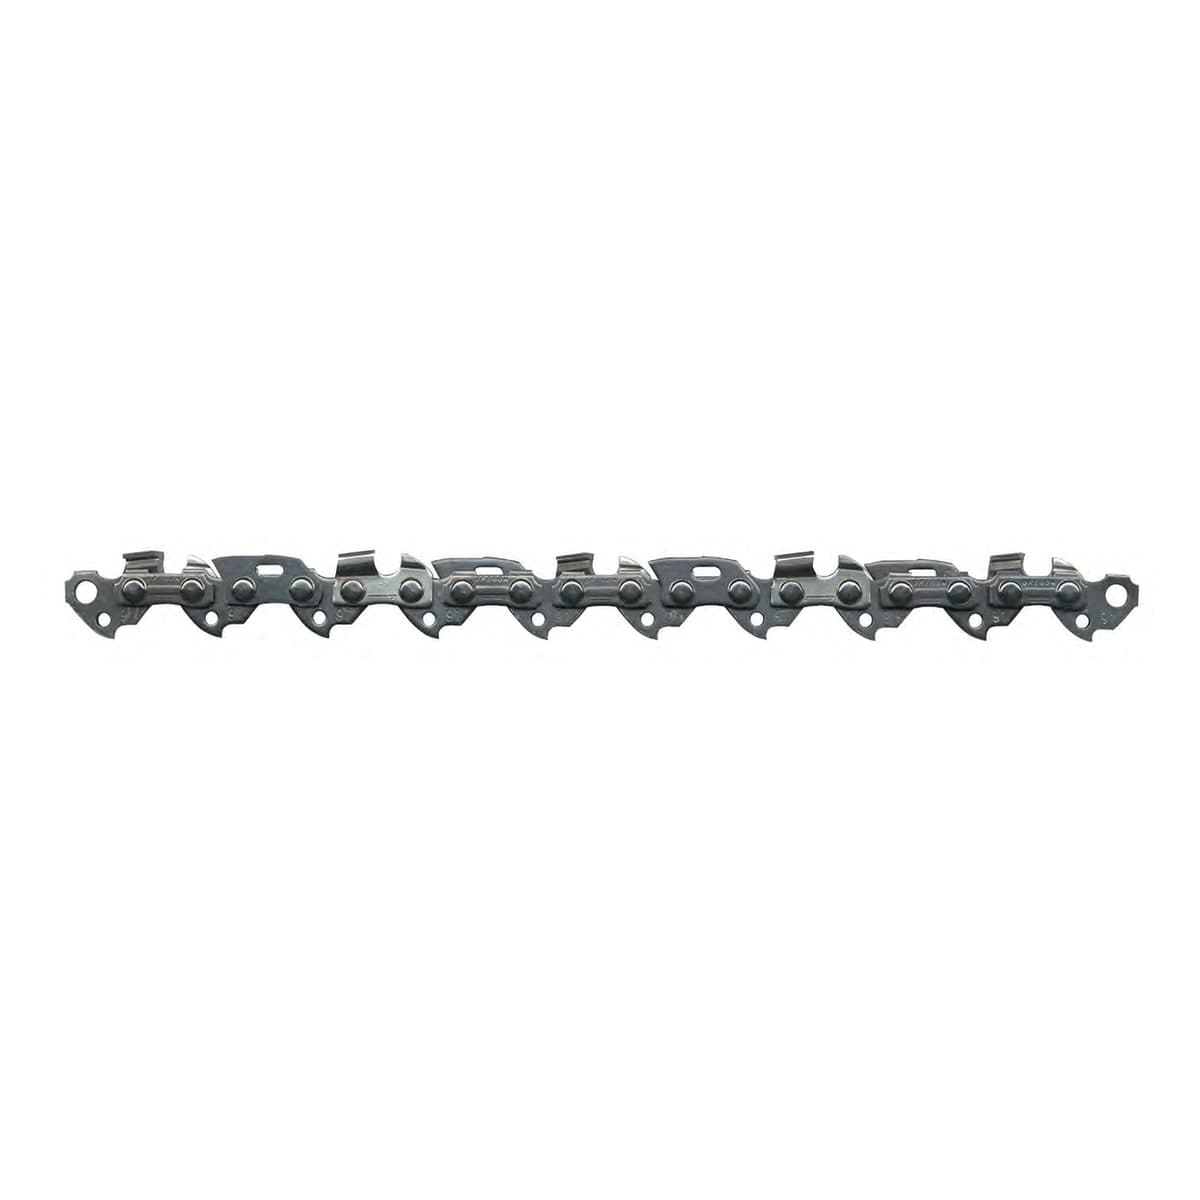 REPLACEMENT CHAIN FOR D91P-052E OREGON CHAINSAW